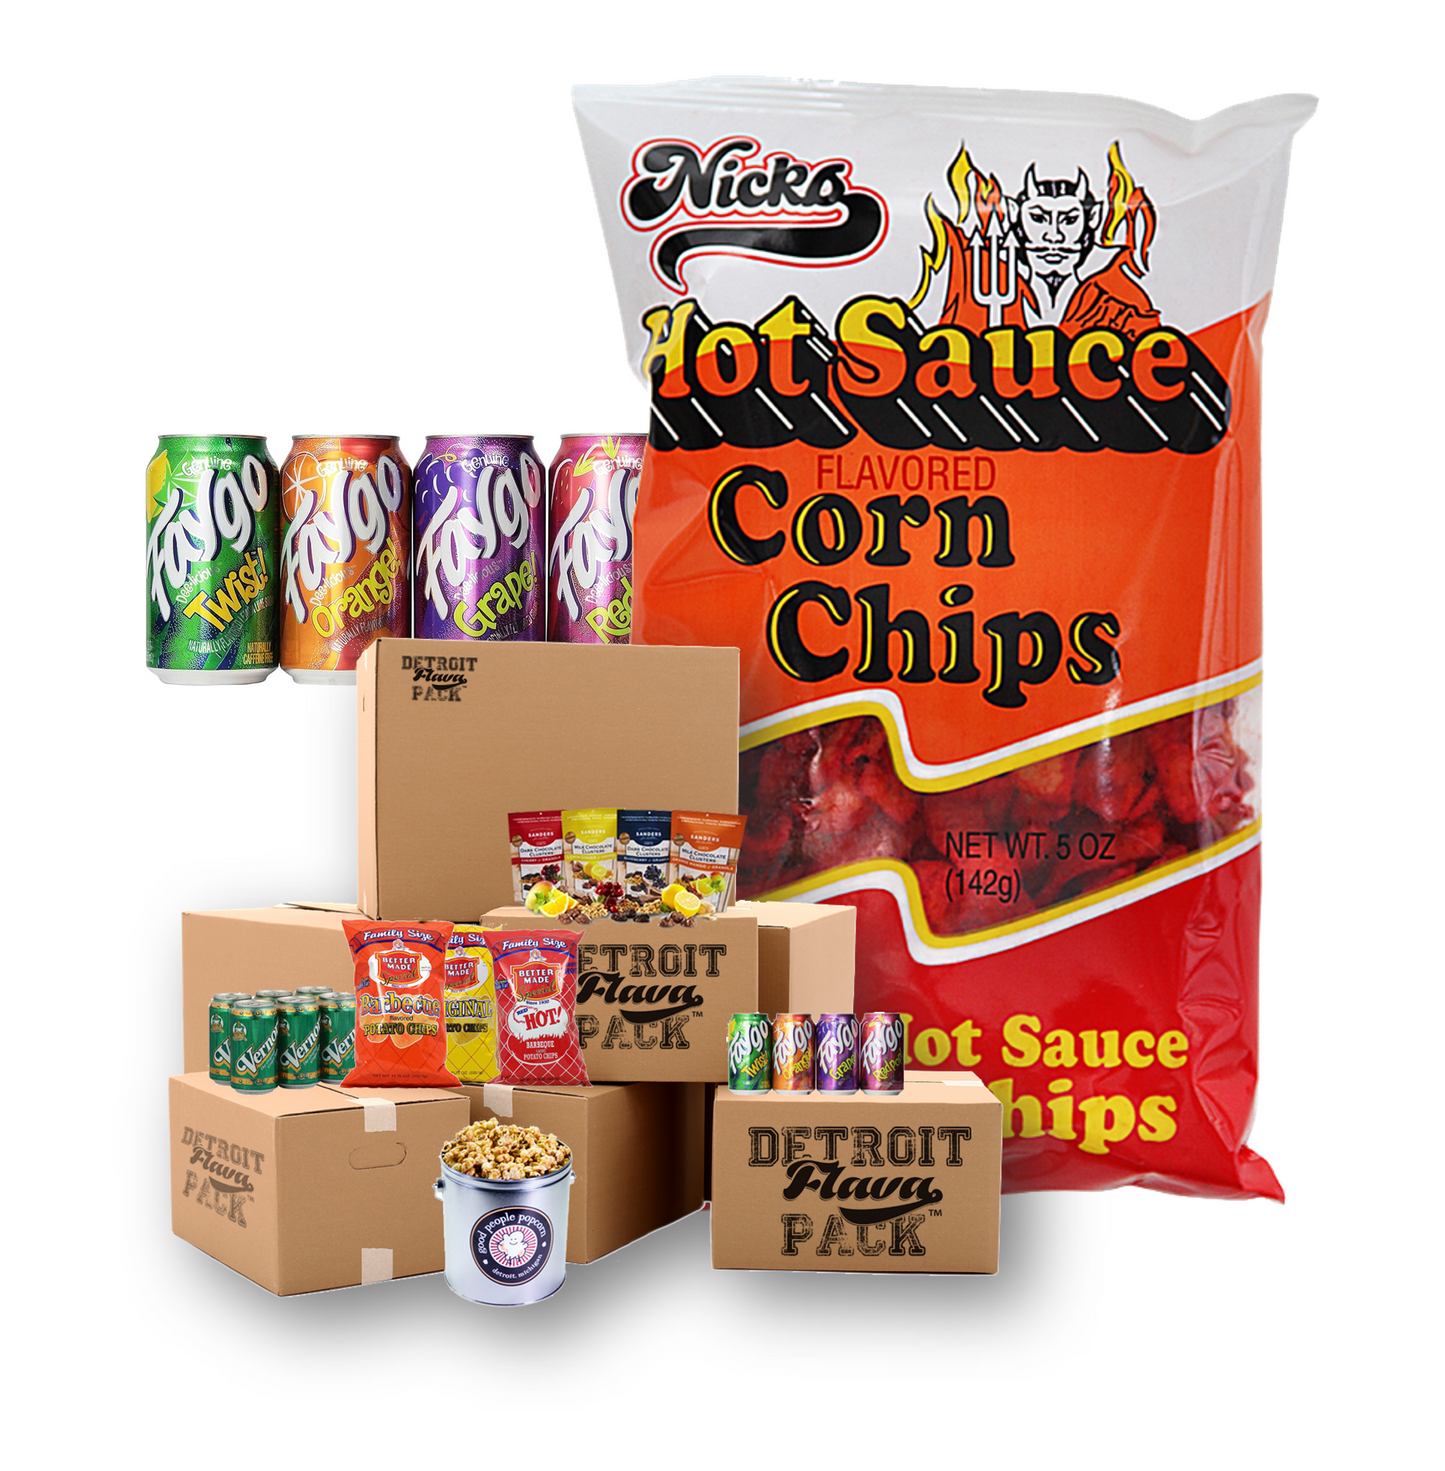 Nick’s Hot Sauce Chips Flava Pack